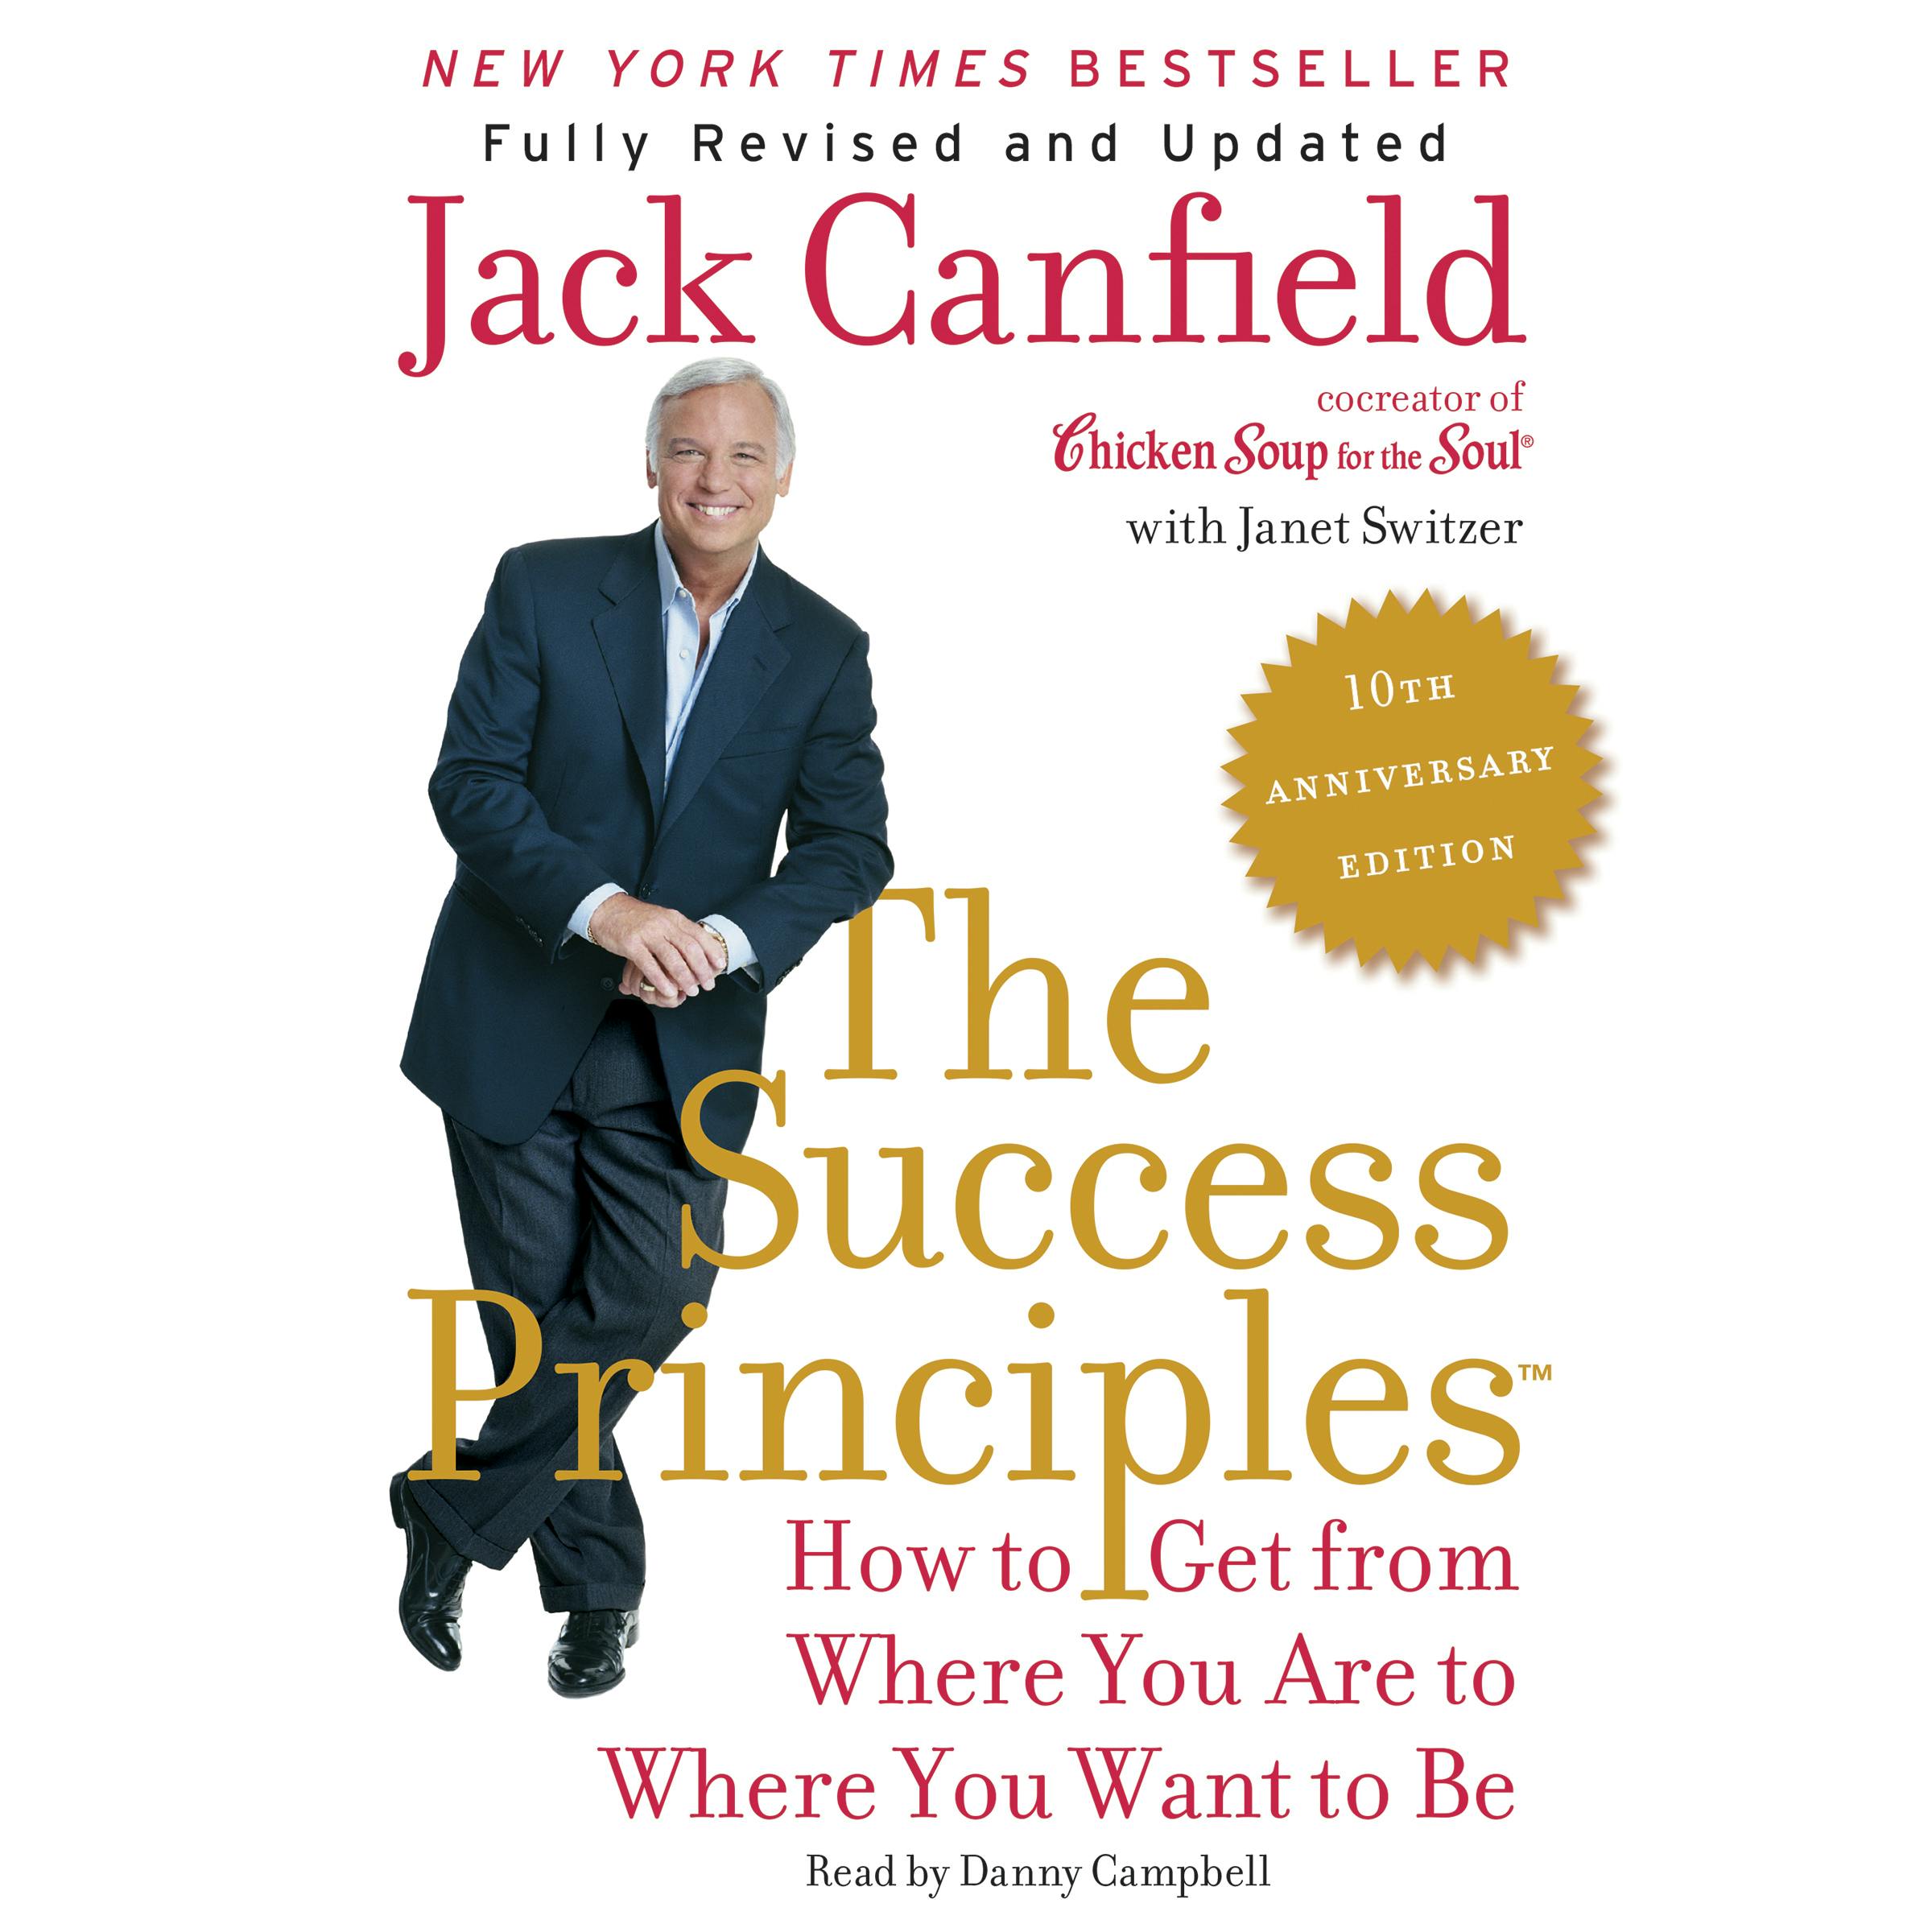 The Success Principles(TM) - 10th Anniversary Edition: How to Get from Where You Are to Where You Want to Be - Jack Canfield, Janet Switzer